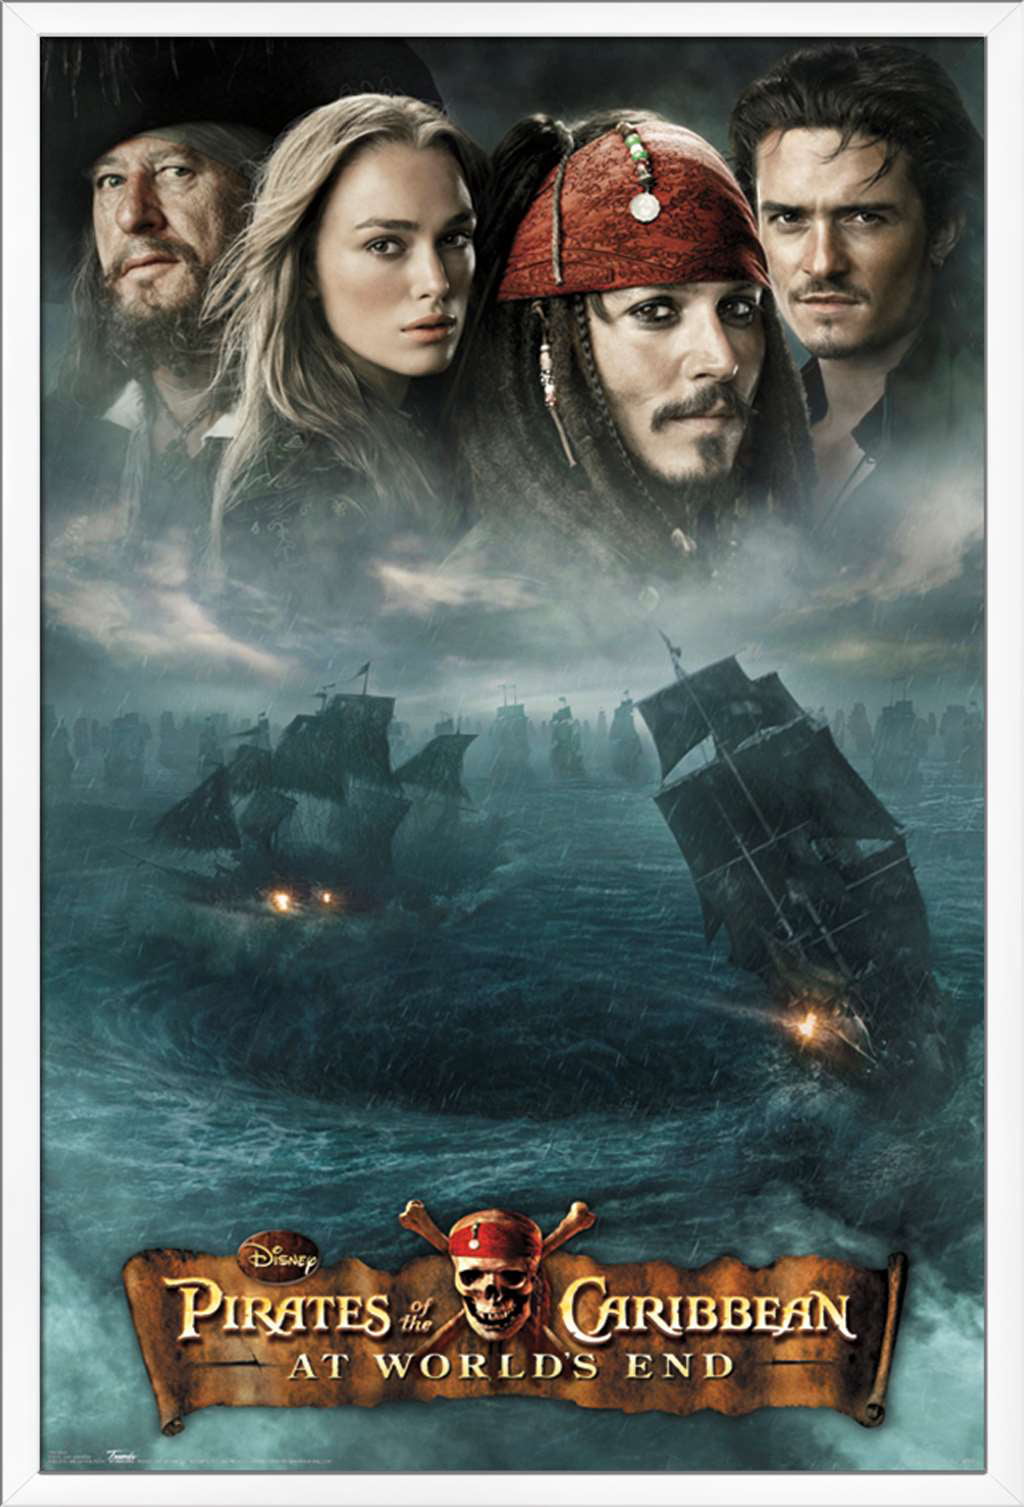 Disney Pirates of the Caribbean: At World's End - DVD One Sheet Poster ...